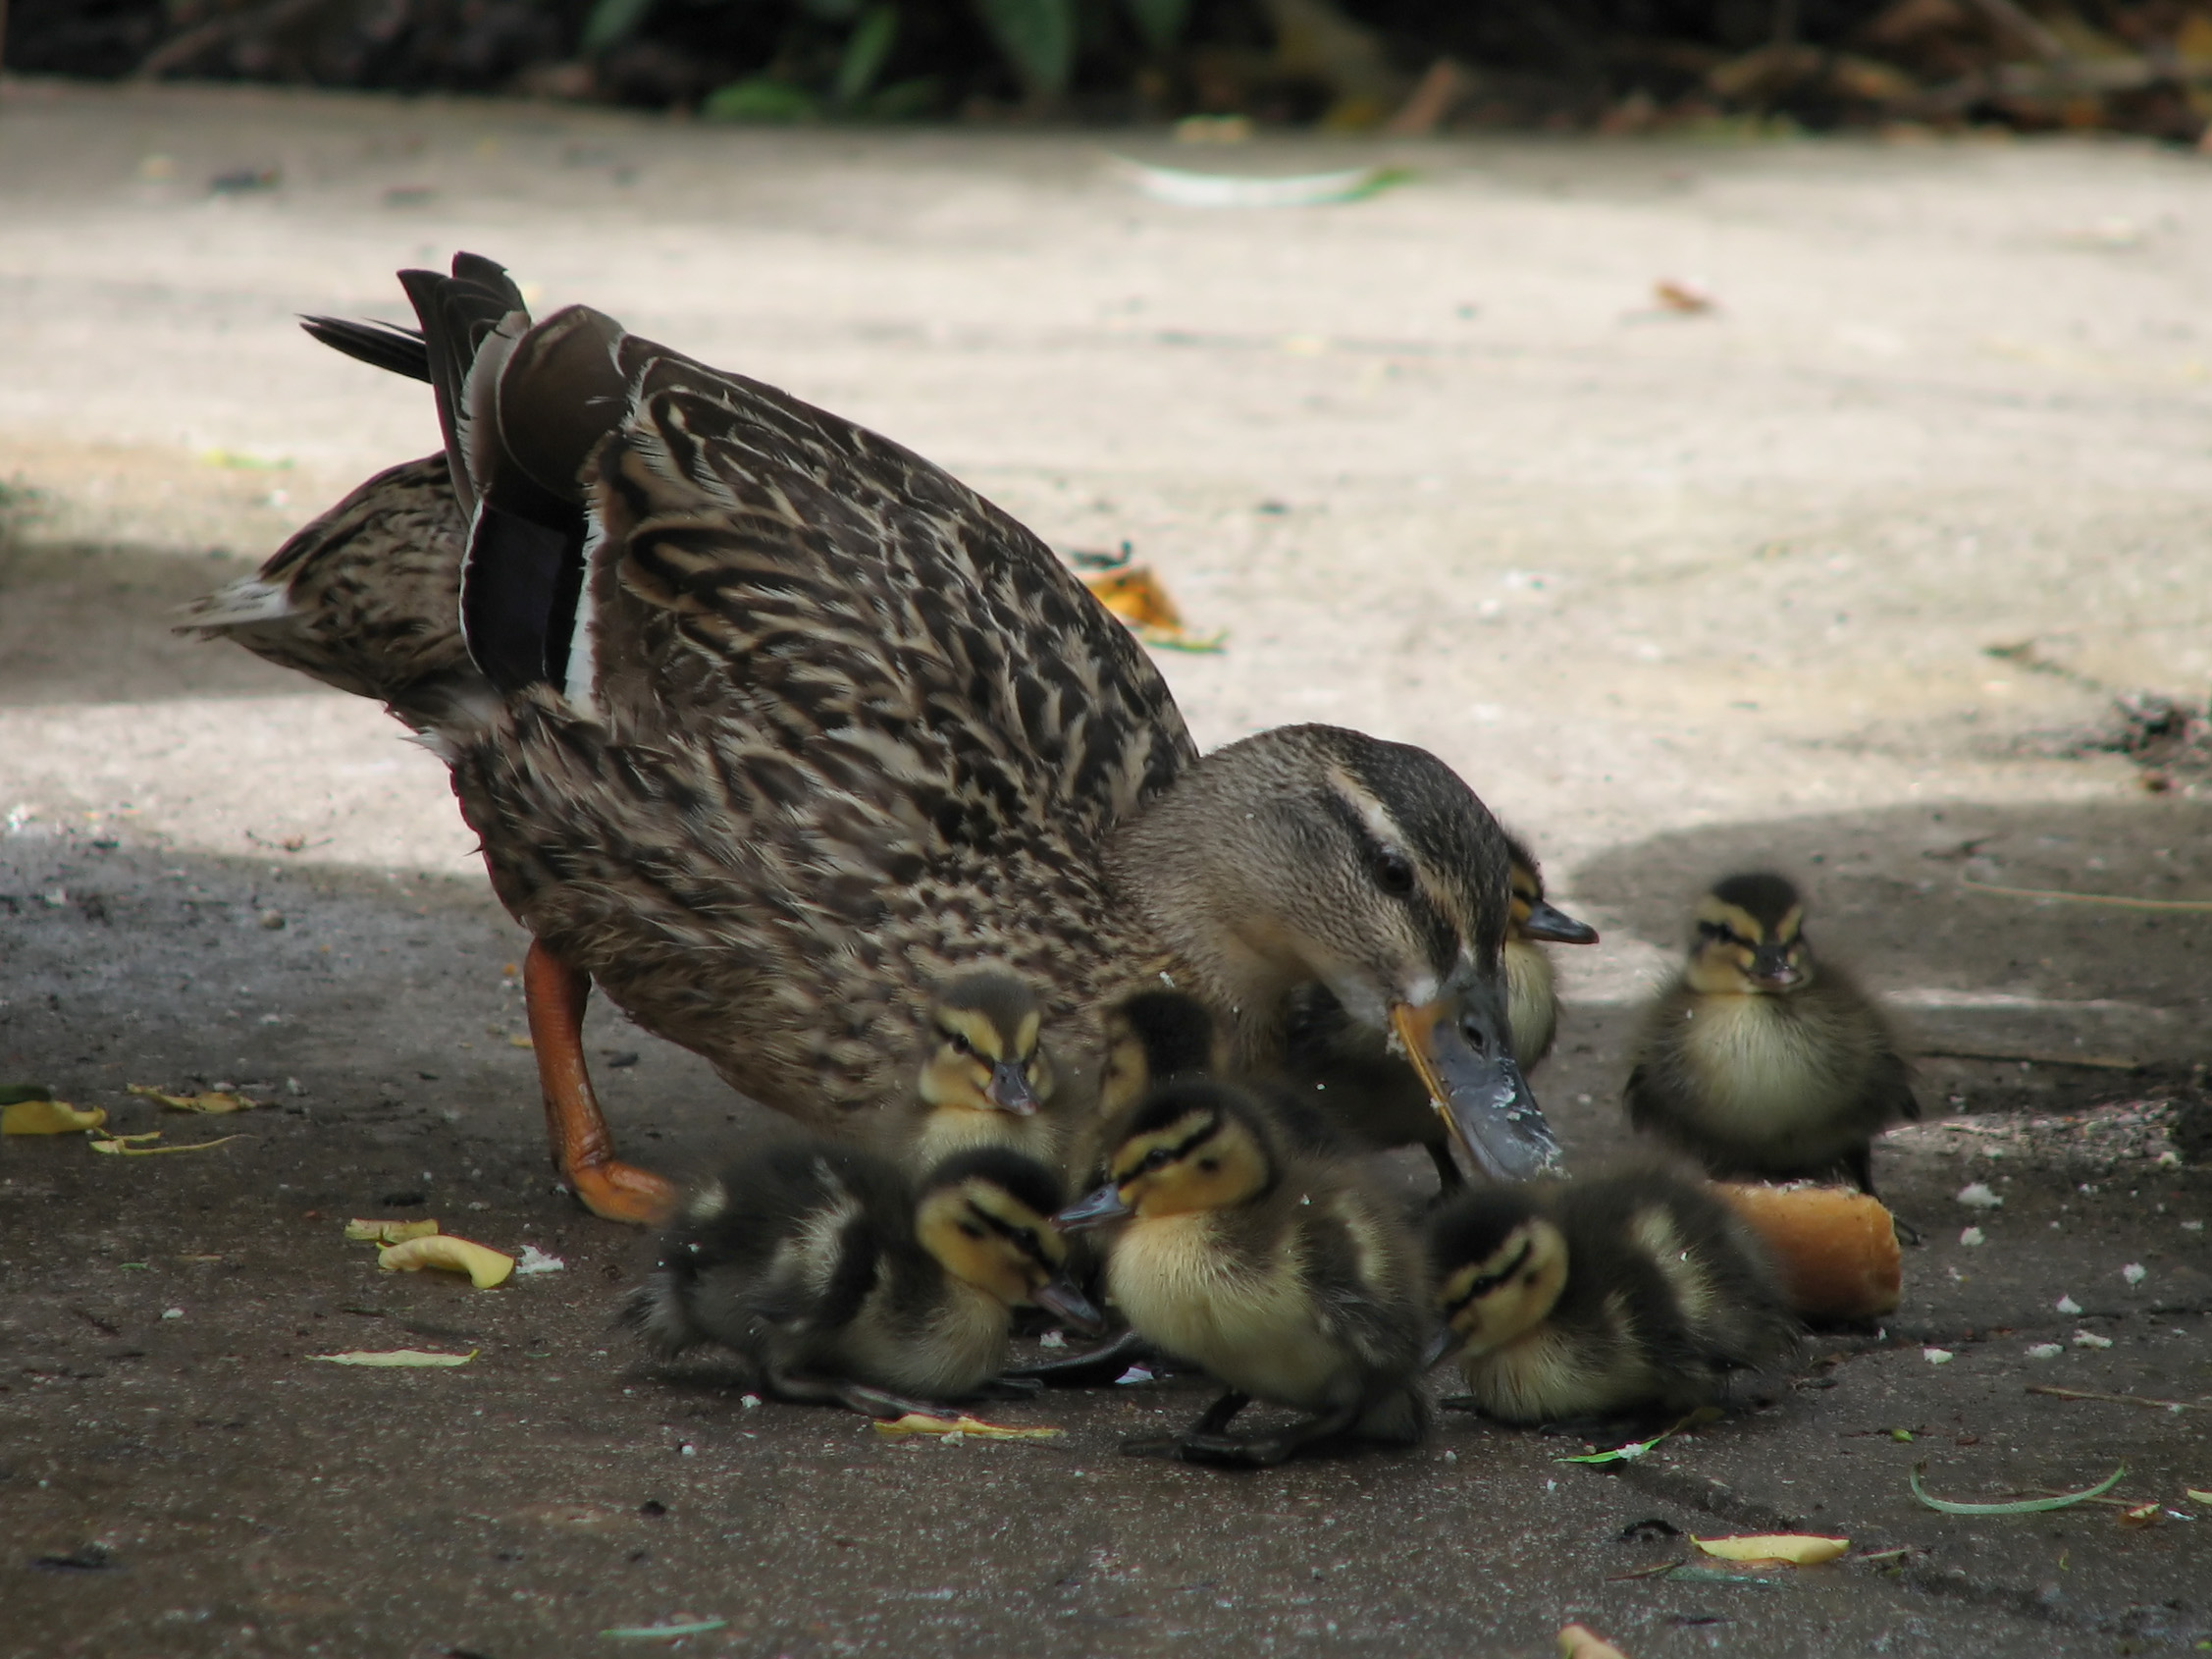 File:Mother mallard and ducklings eating bread.jpg - Wikimedia Commons